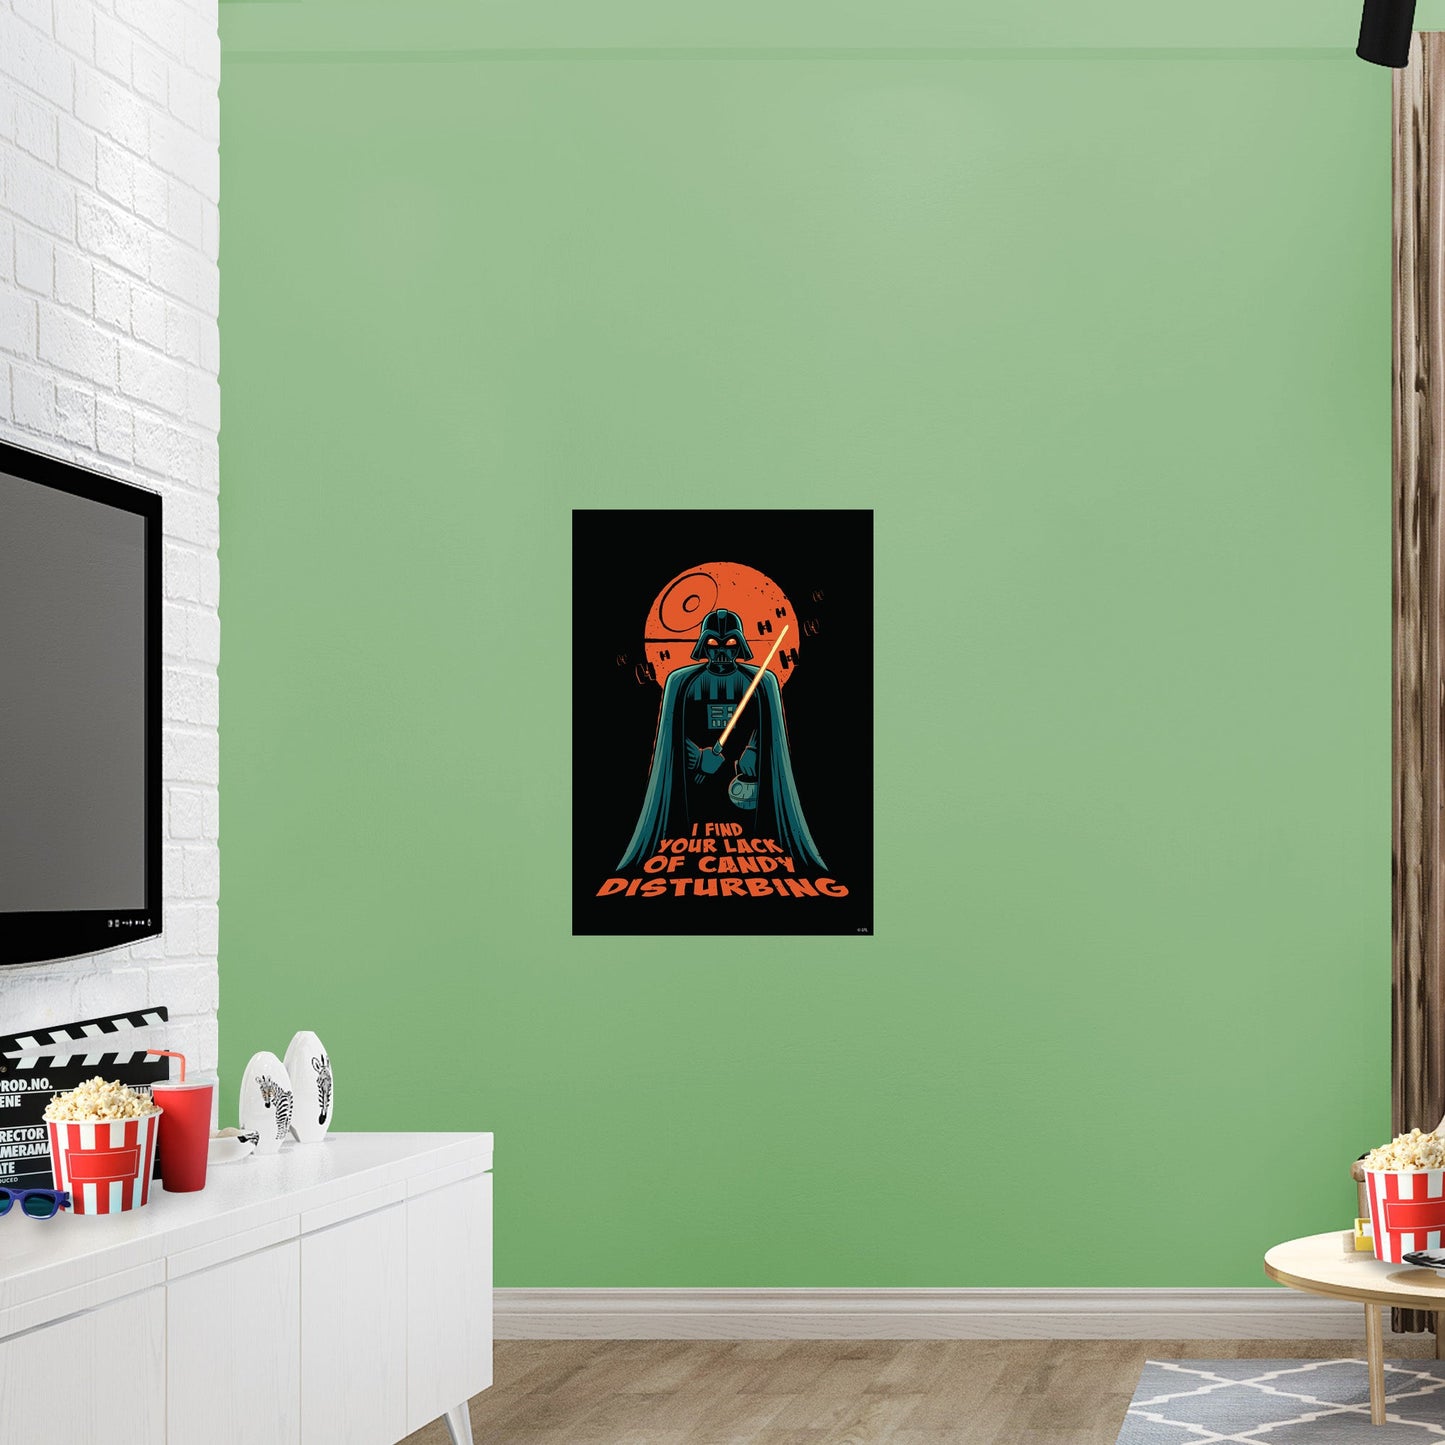 Darth Vader Lack of Candy Poster - Officially Licensed Star Wars Removable Adhesive Decal